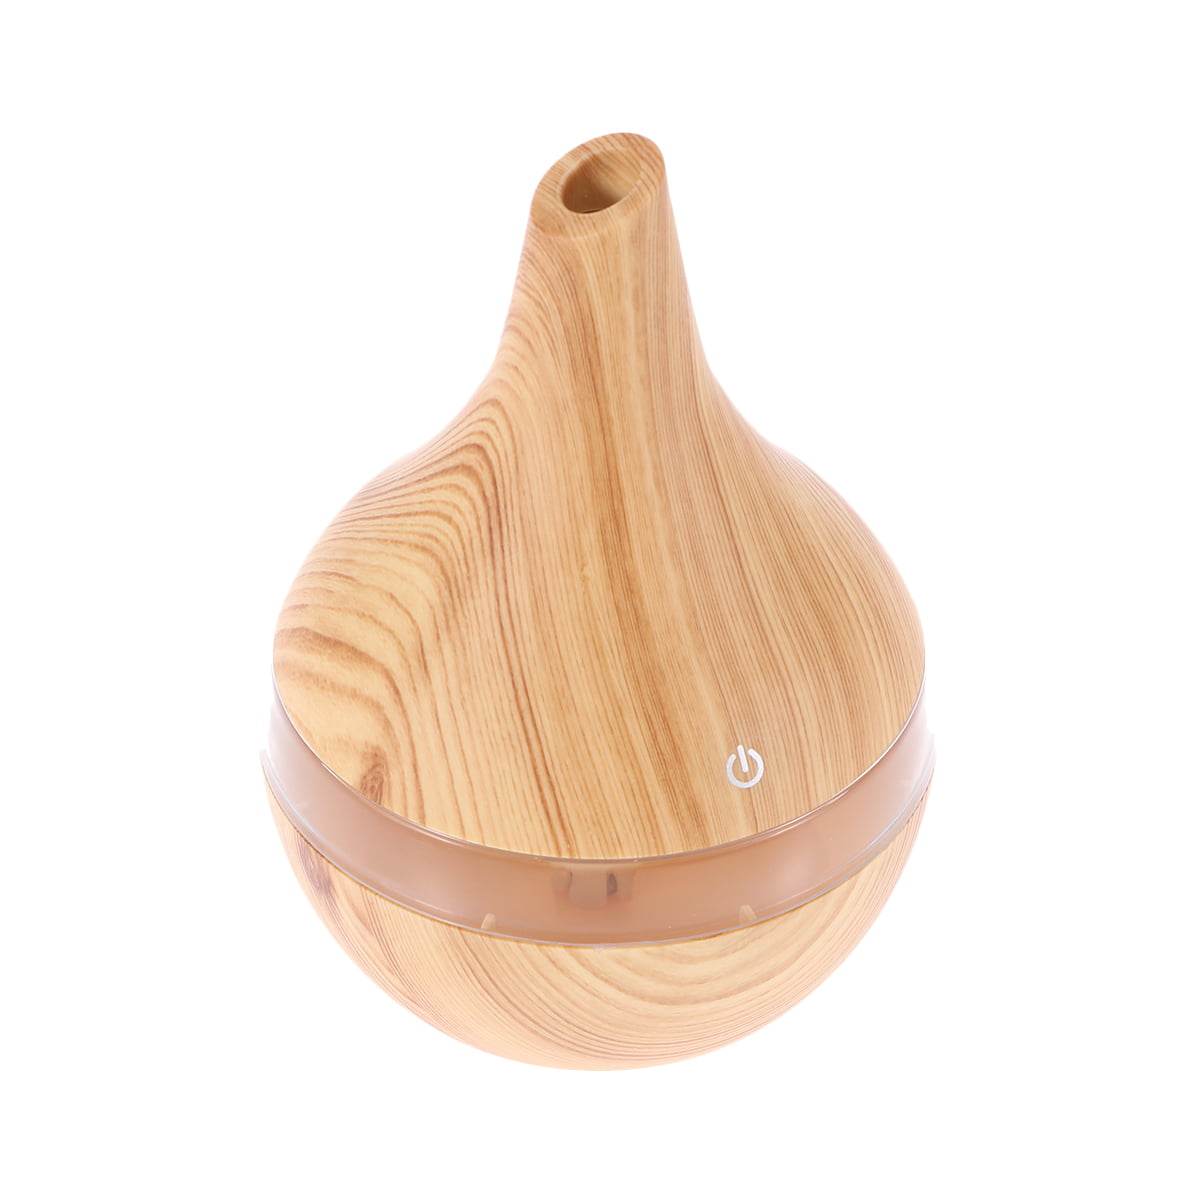 Details about   Wooden Ultrasonic Aroma Oil Diffuser 